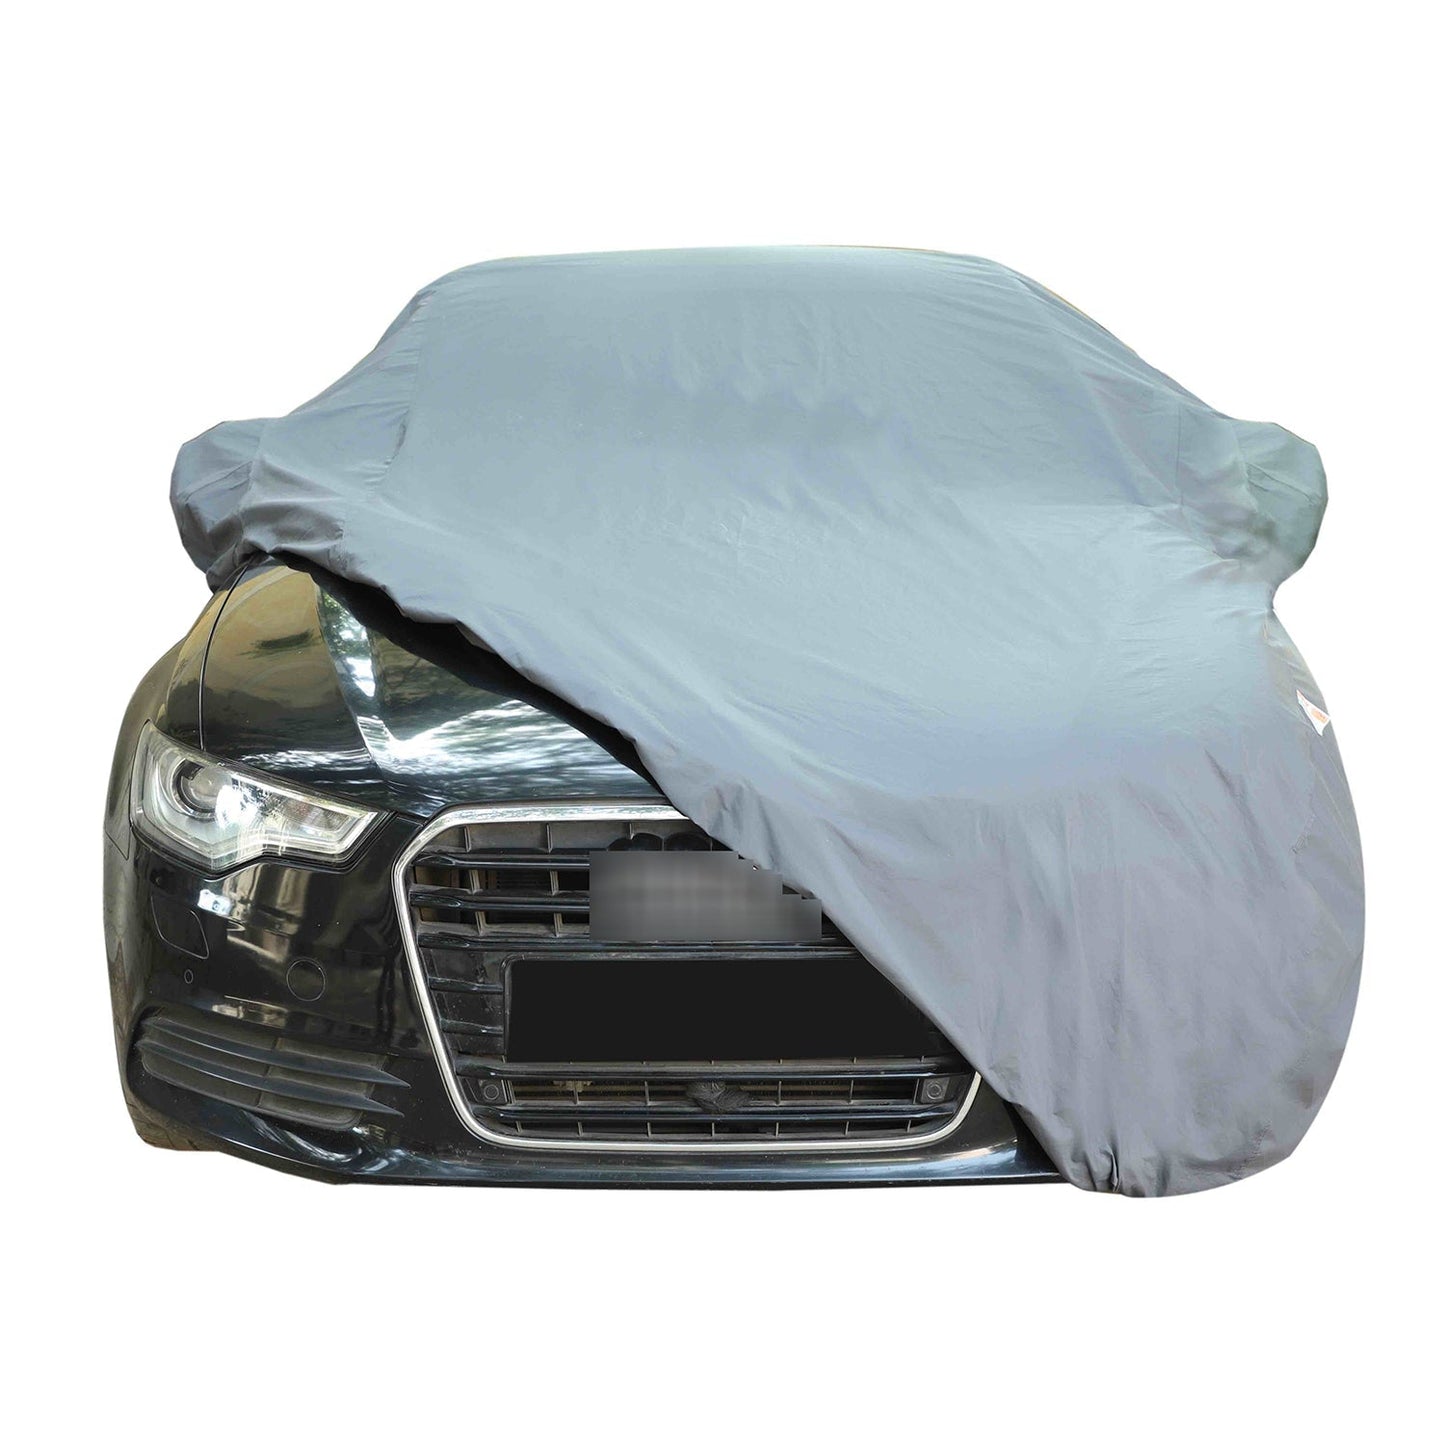 Oshotto Dark Grey 100% Anti Reflective, dustproof and Water Proof Car Body Cover with Mirror Pockets For Hyundai Aura